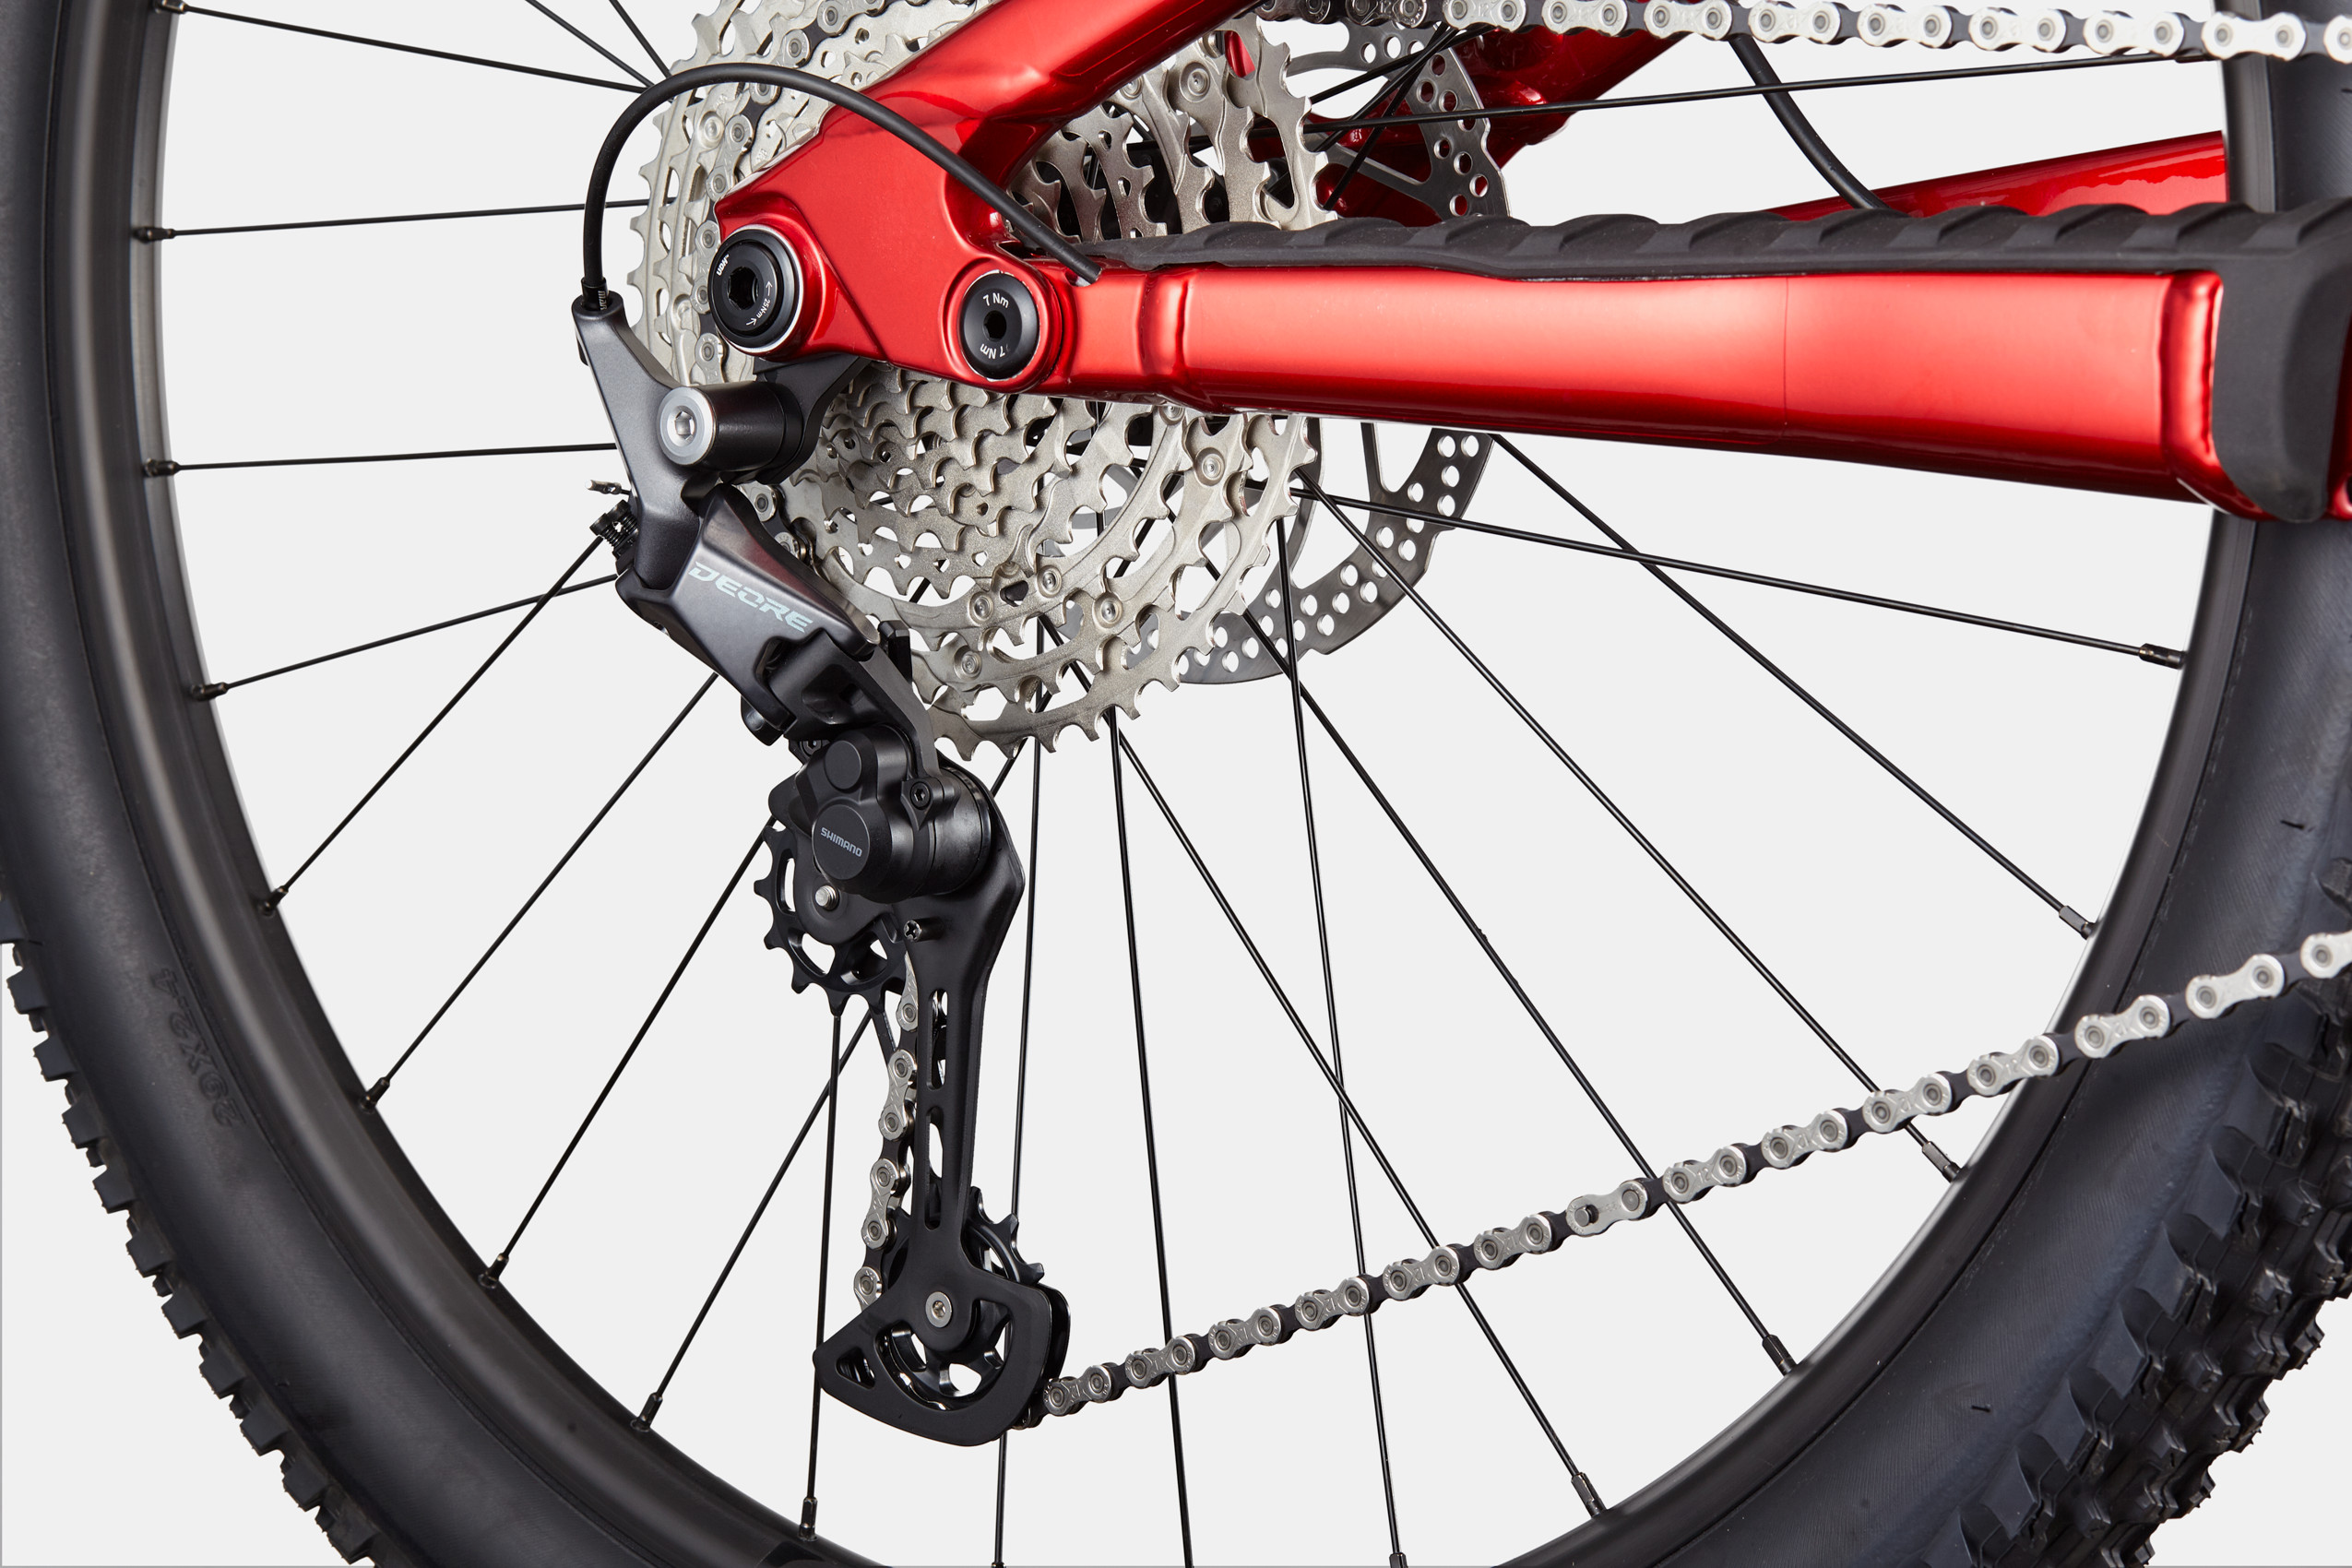 Cannondale Habit 4 | Candy Red